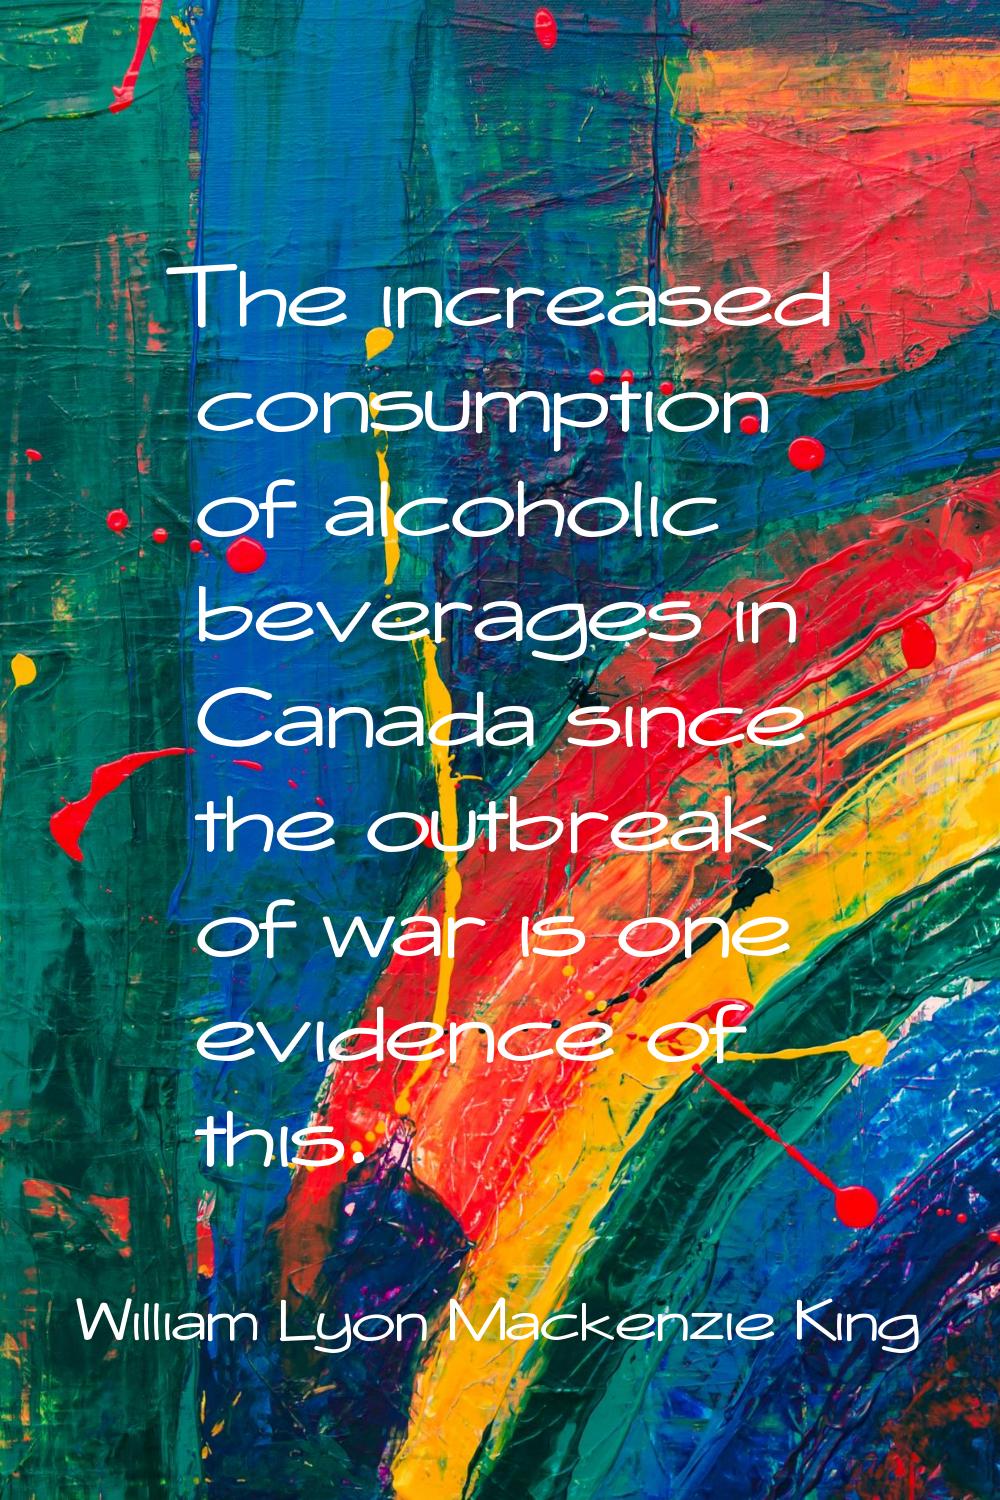 The increased consumption of alcoholic beverages in Canada since the outbreak of war is one evidenc